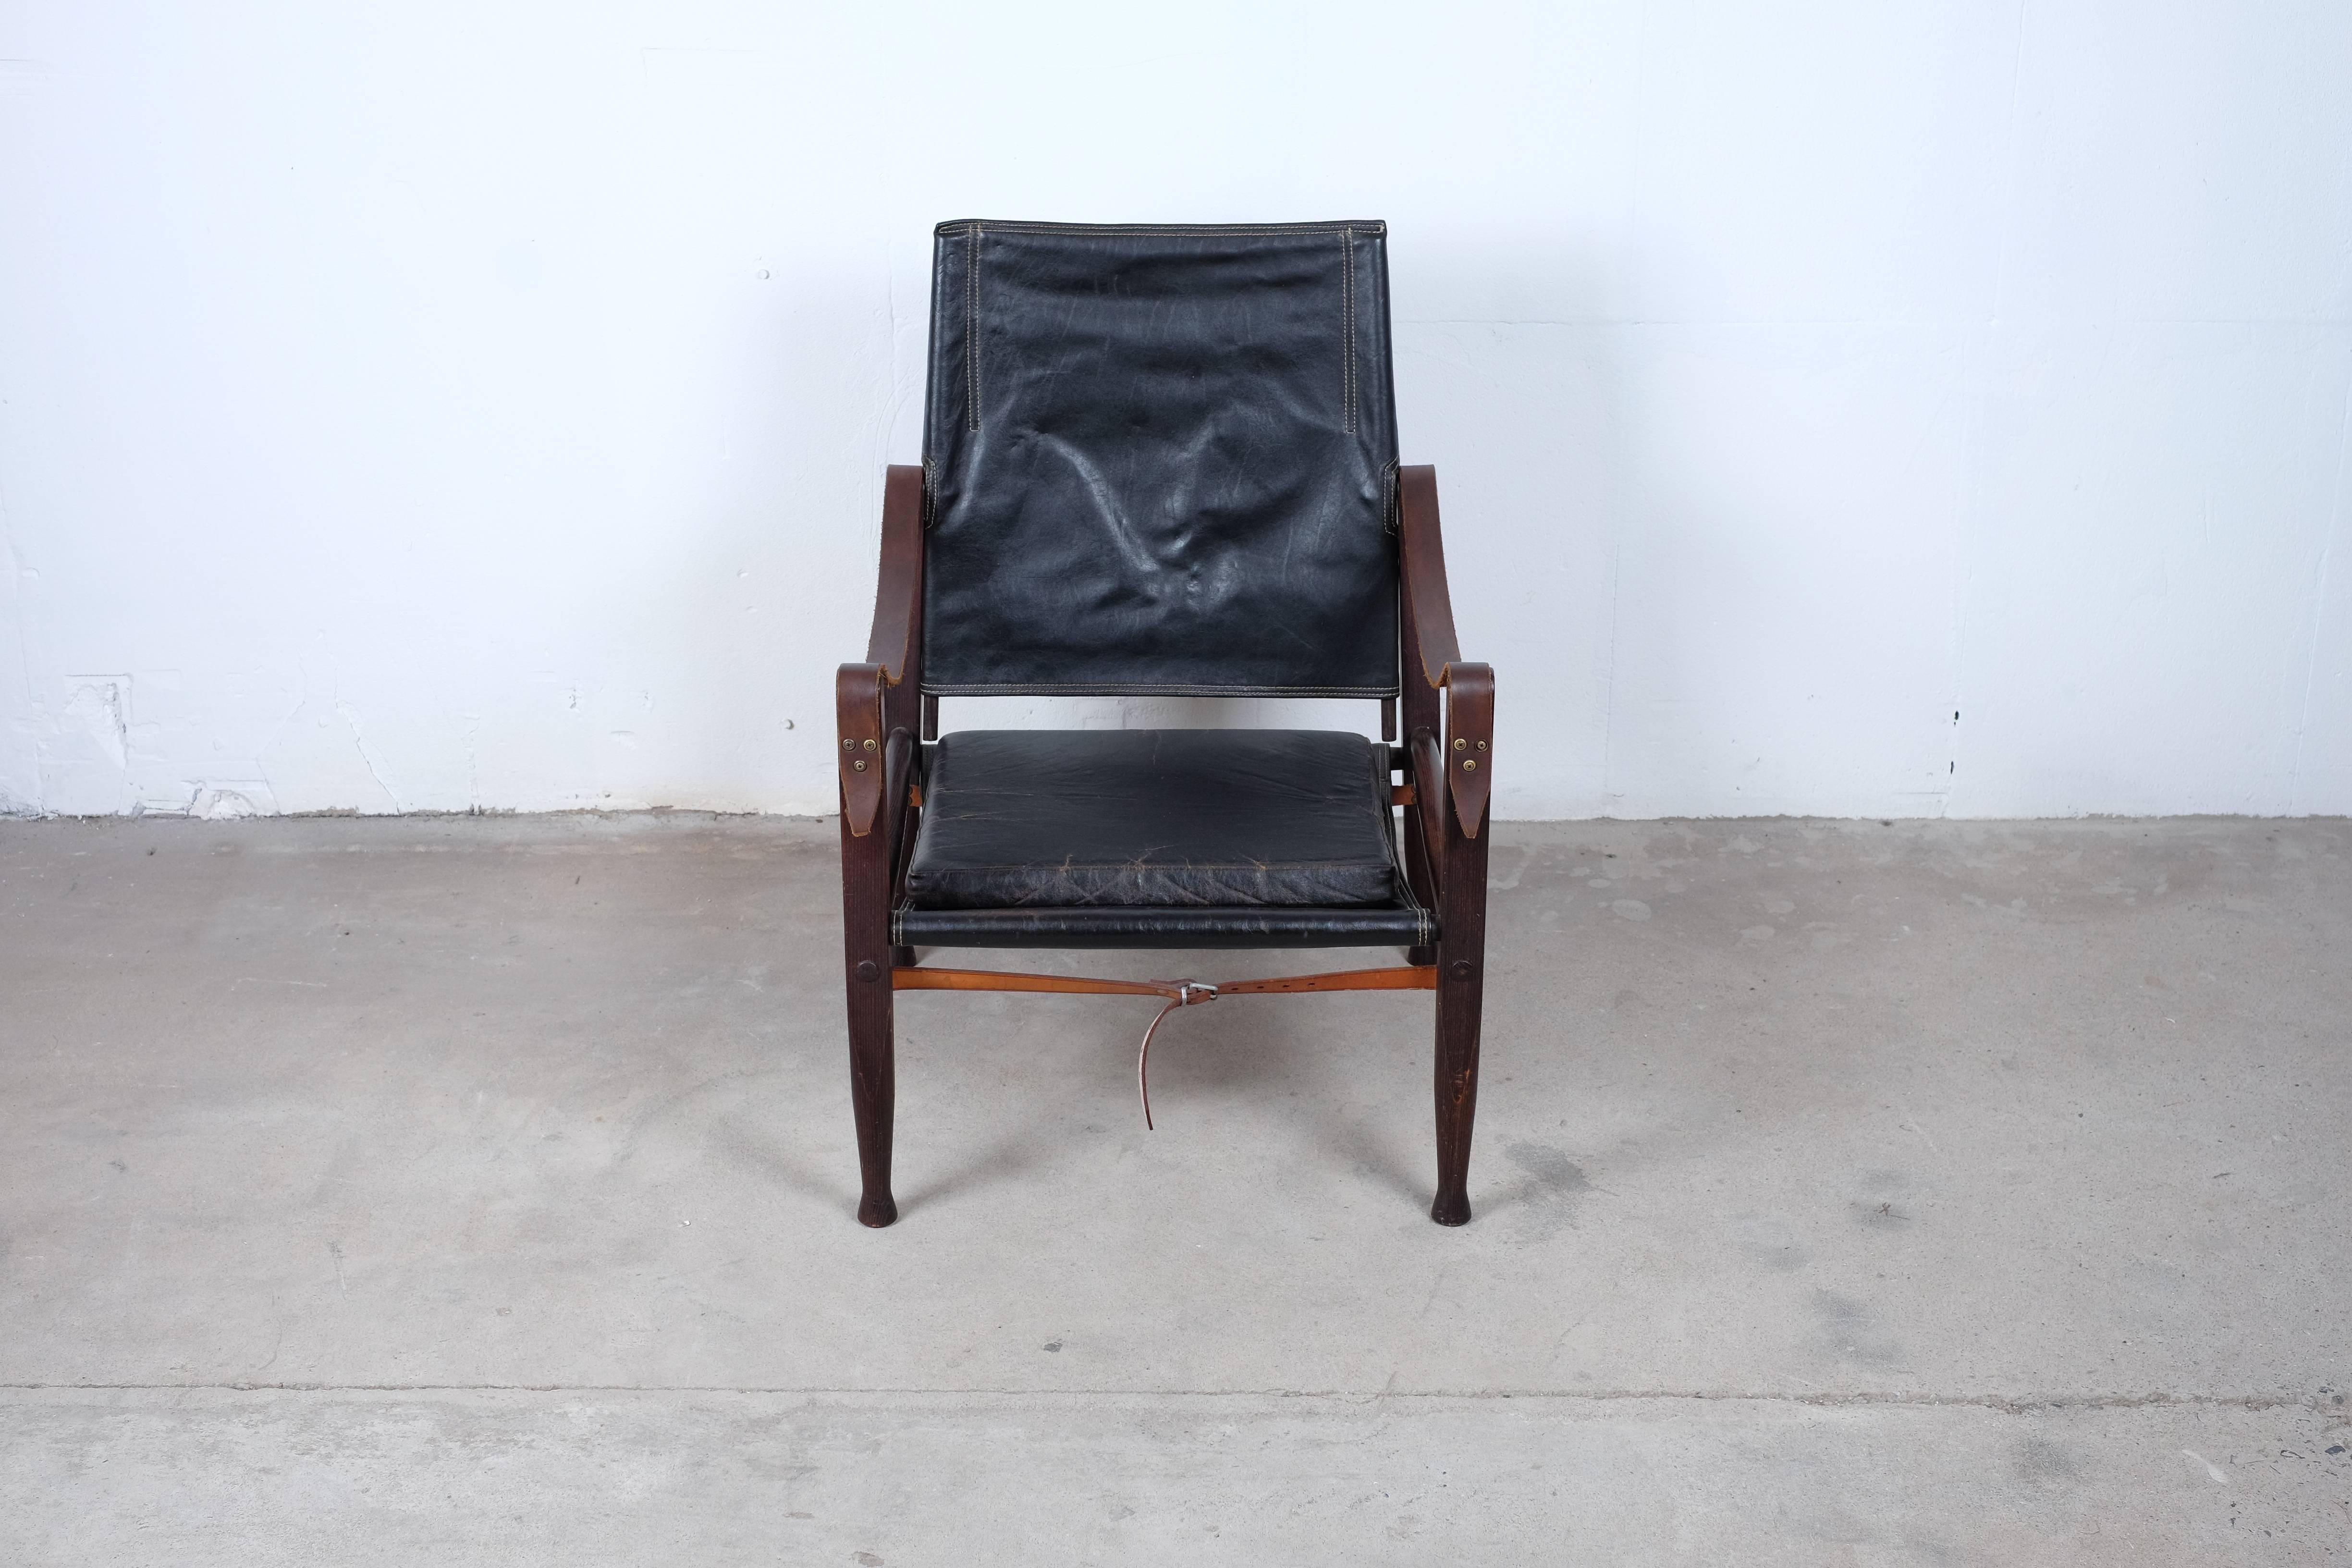 Stunning and original safari chair by Kaare Klint. The man behind the Classic safari chair from 1937, considered the Godfather of Danish design.

The chair was inspired by an English officer’s chair he had seen in an African travel guide.

This